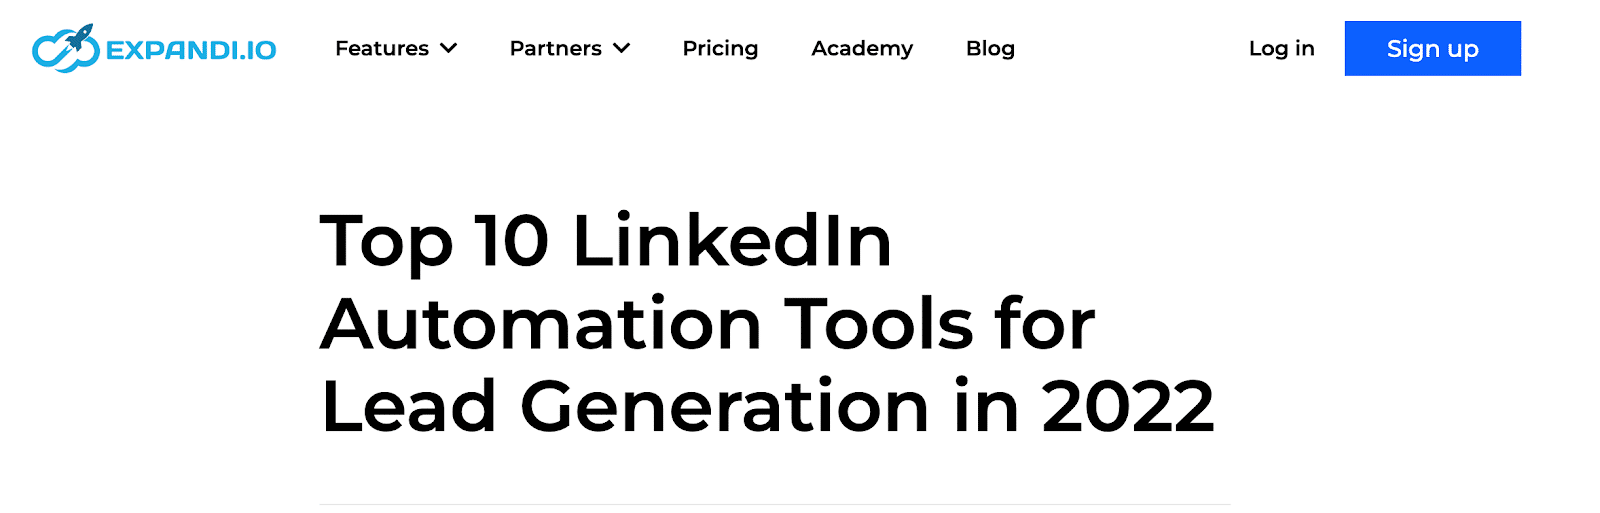 Quoleady's client Expandi's blog: Top 10 LinkedIn automation tools for Lead Generation